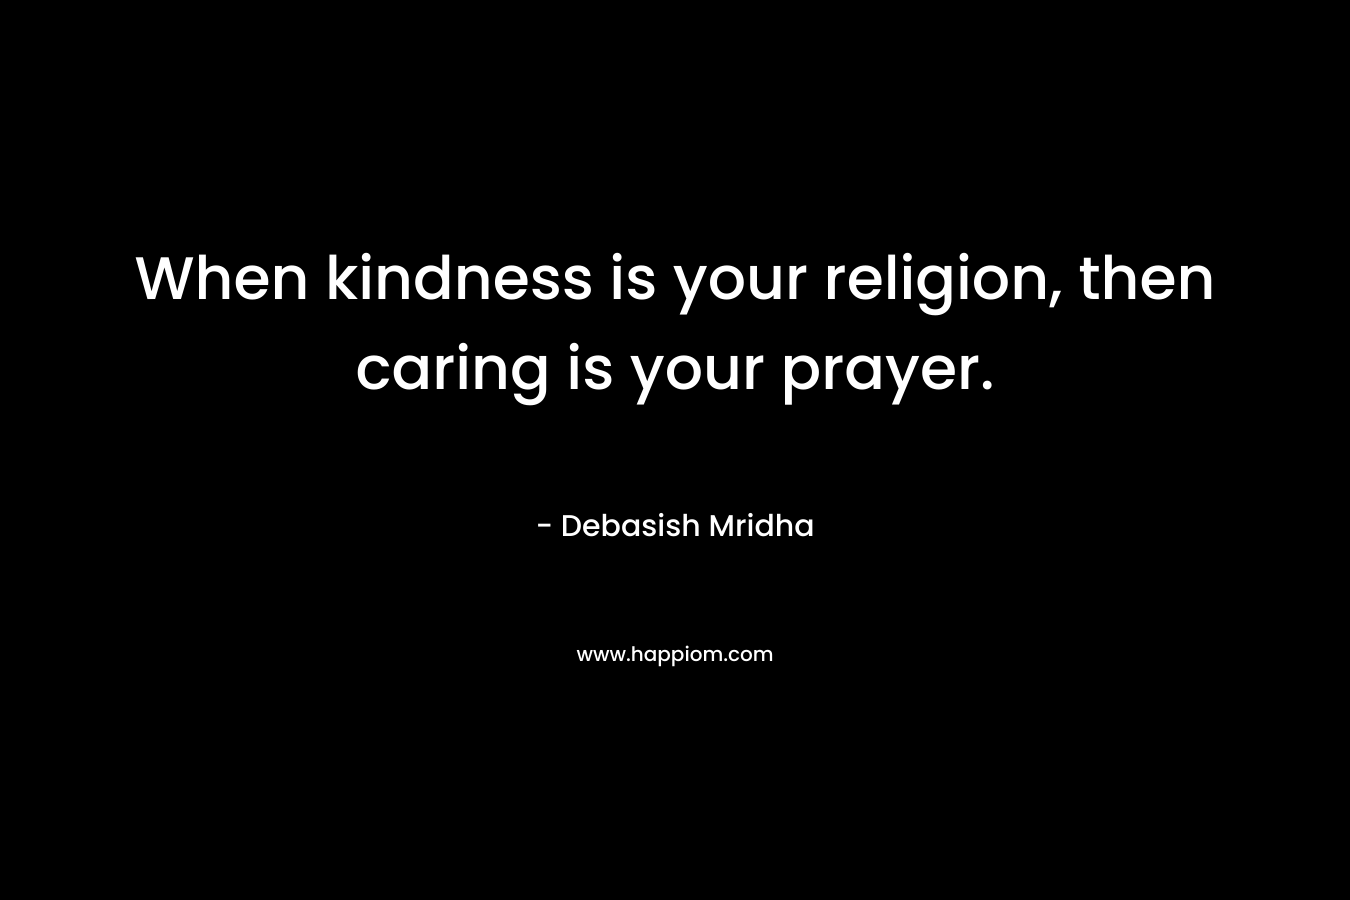 When kindness is your religion, then caring is your prayer.